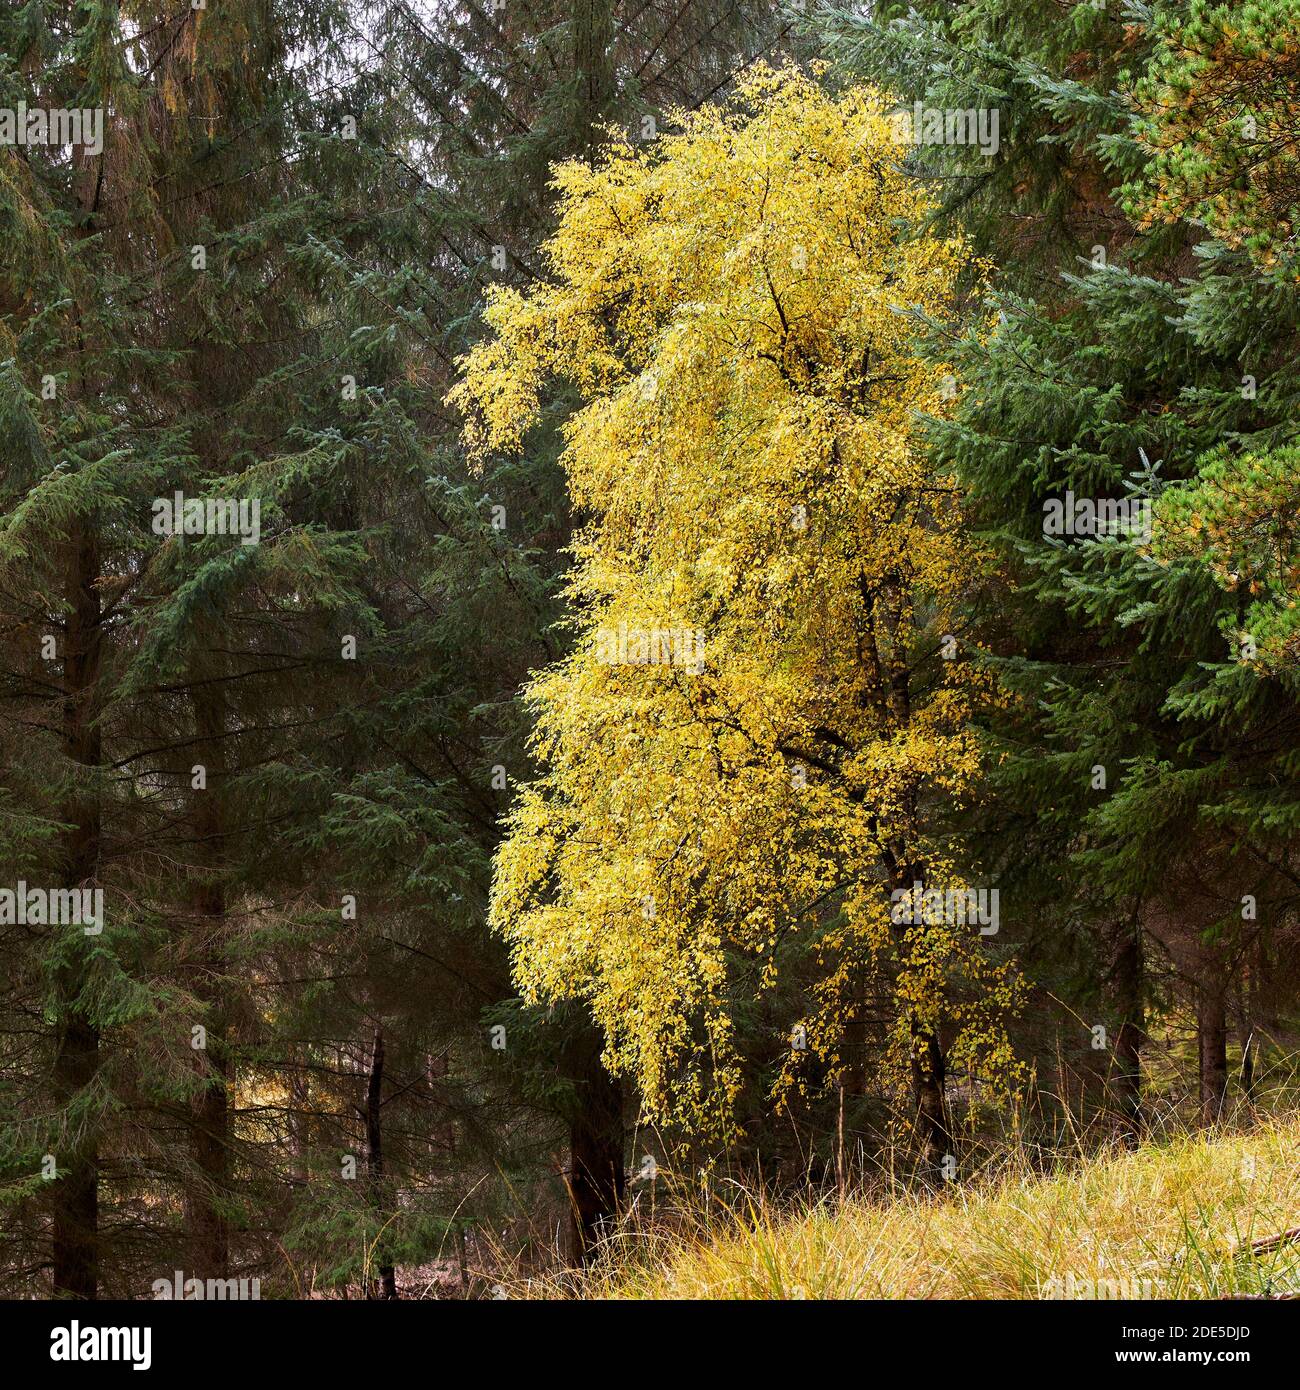 Silver Birch tree on the edge of a forestry plantation, Glen Lyon, Perth and Kinross, Scotland. Stock Photo